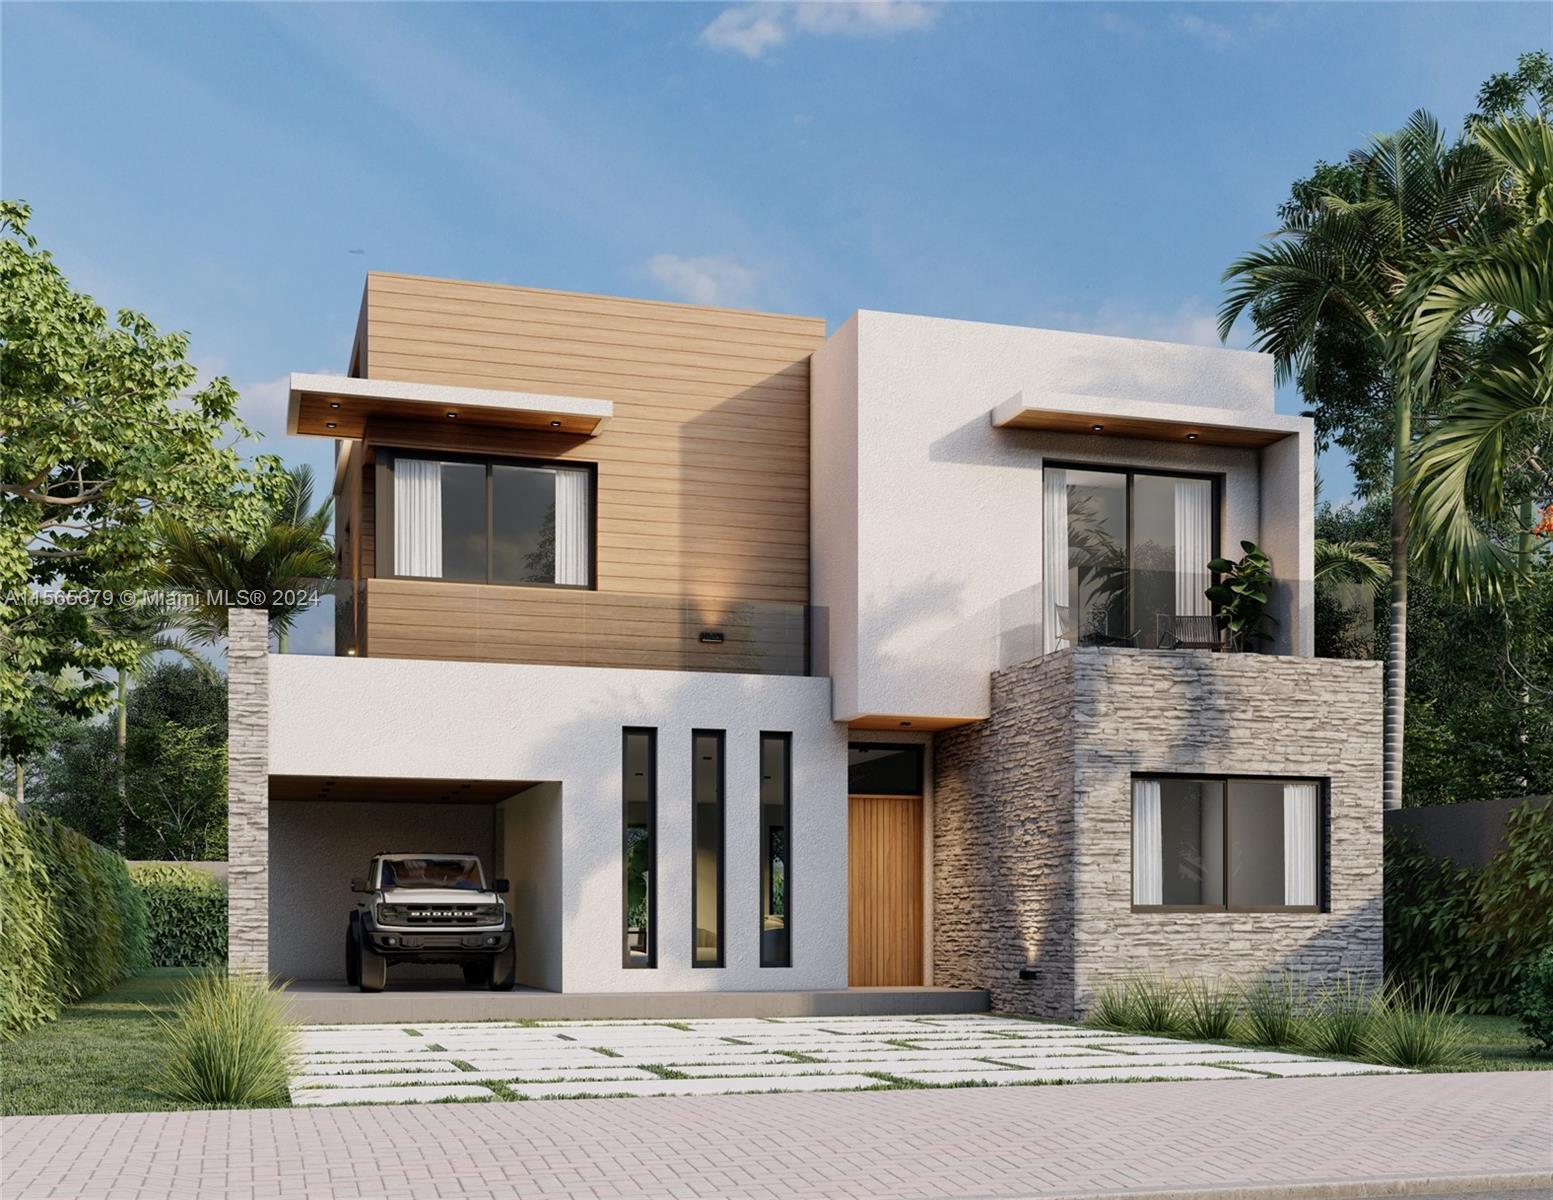 New and modern 3,306 Sq Ft, Two Story, 5 Bedrooms and 4 bathrooms home in the heart of Coconut Grove